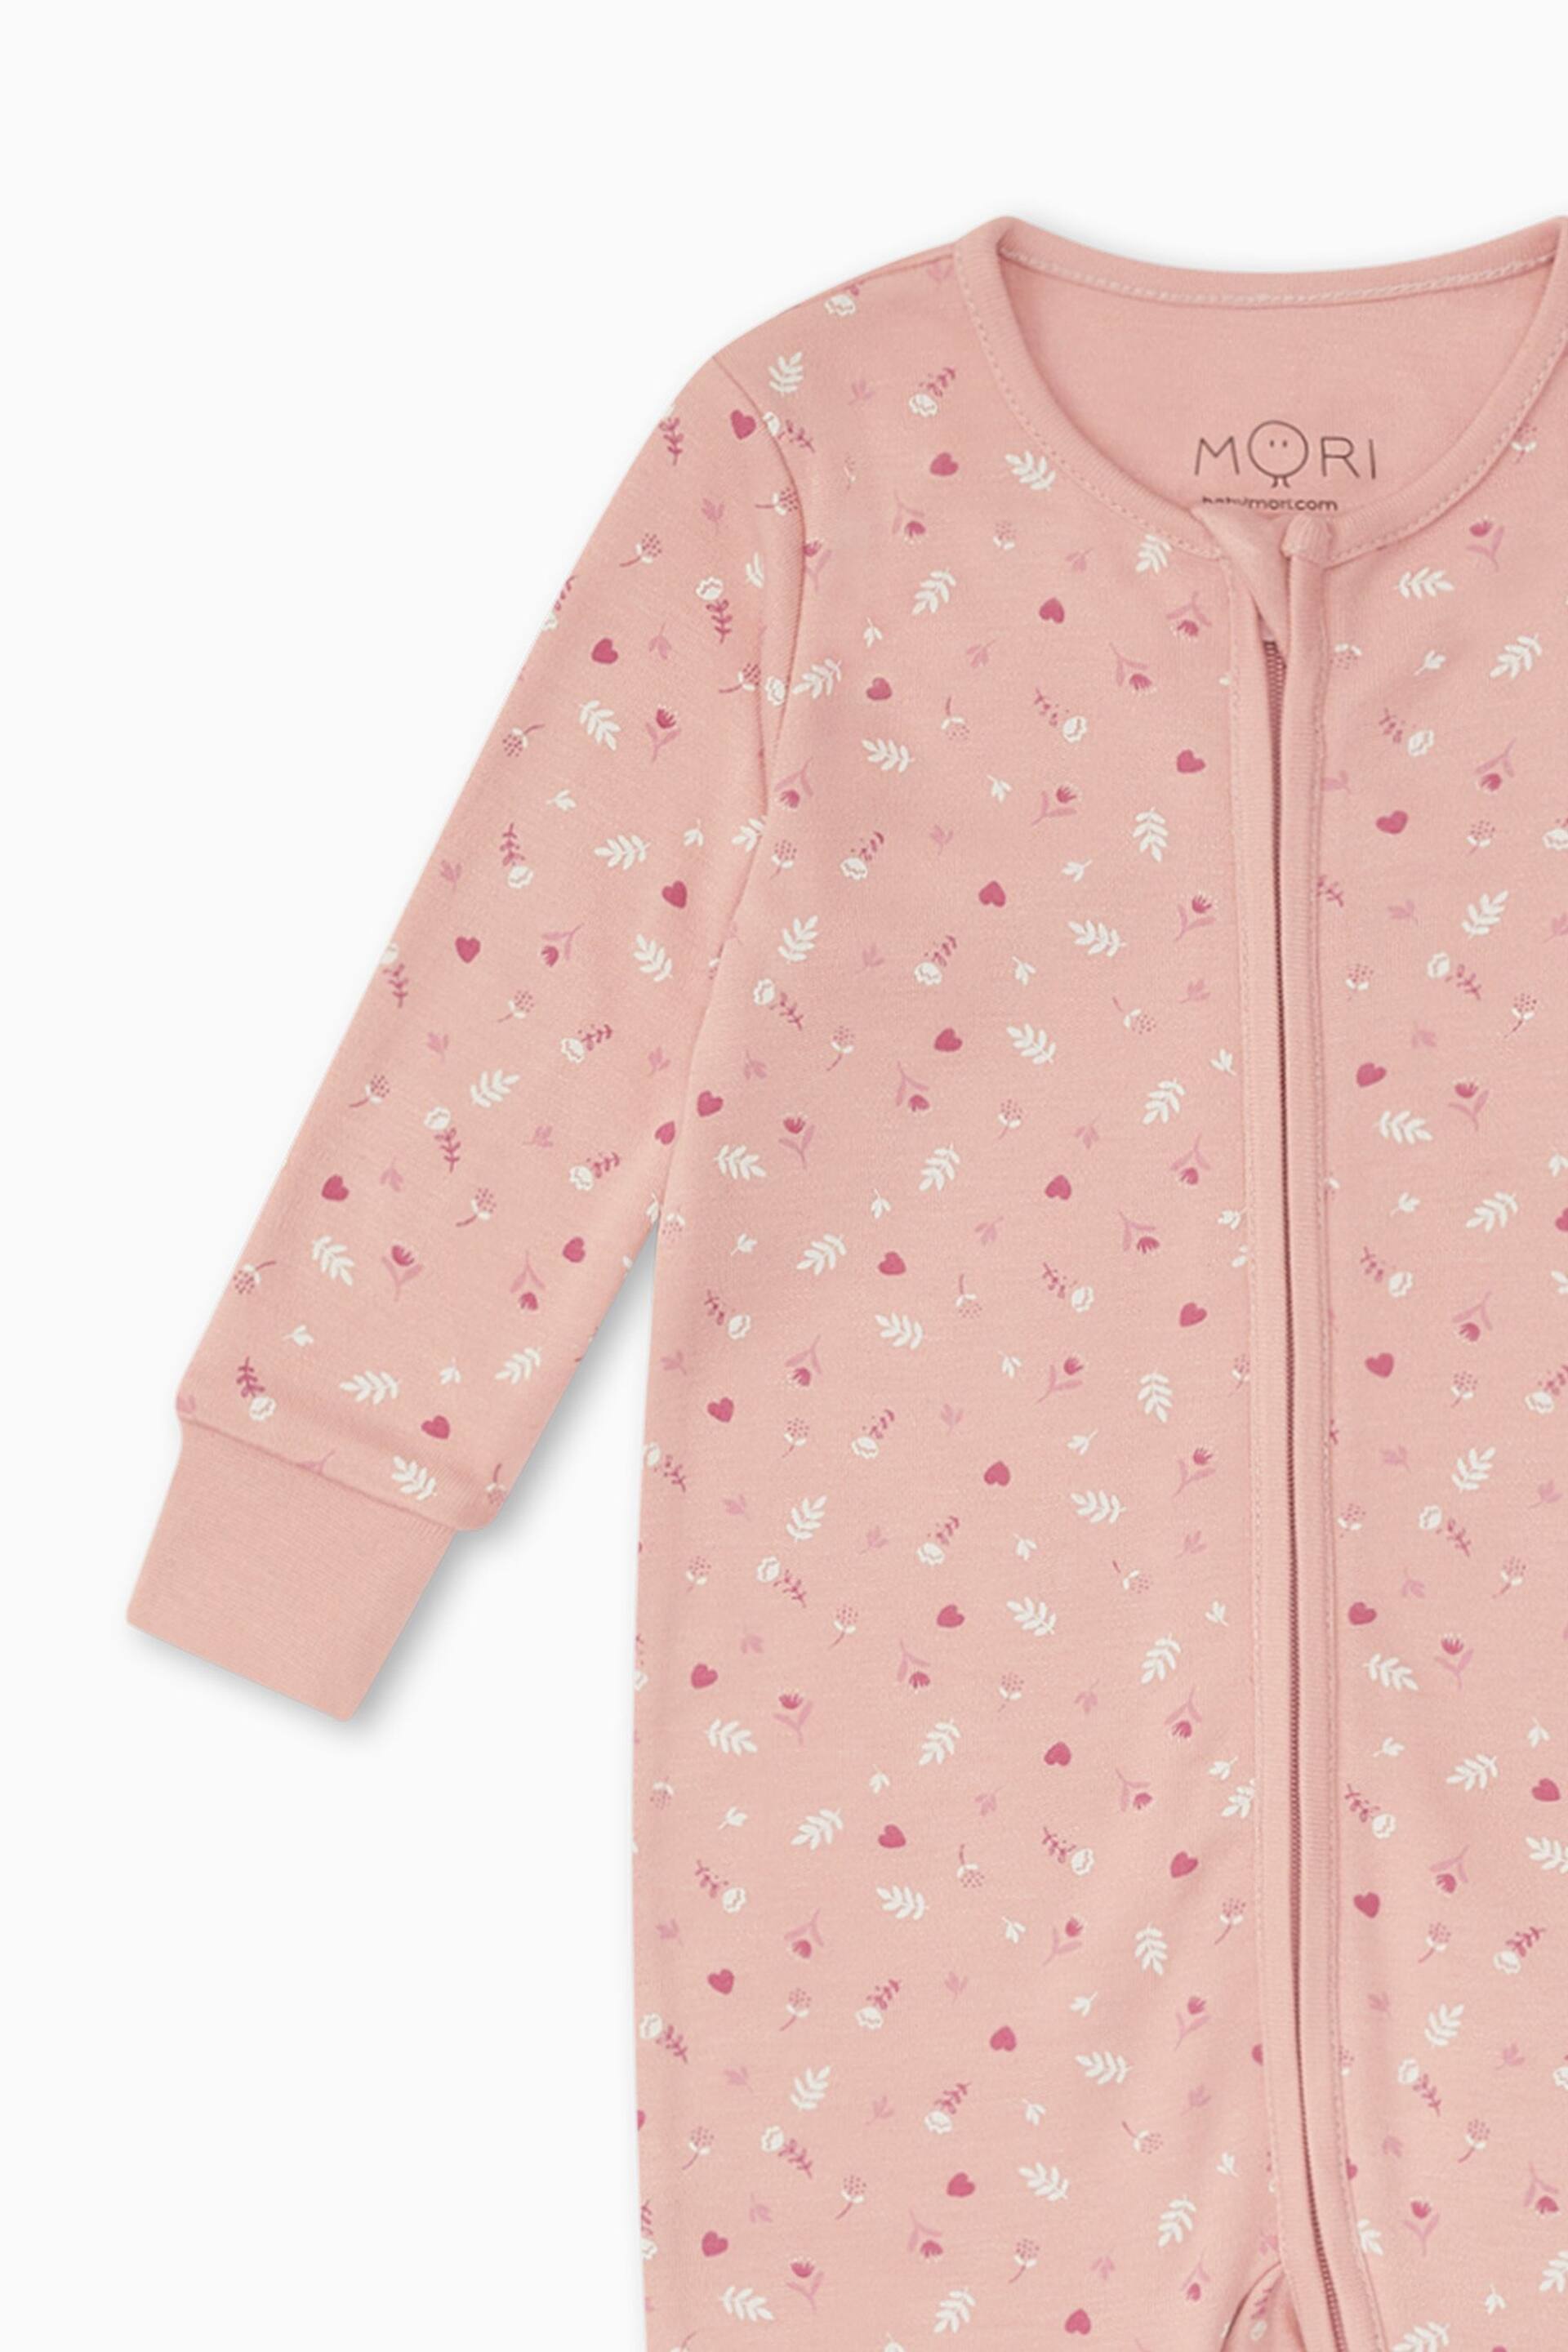 Mori Organic Cotton & Bamboo Clever Zip Up Sleepsuit - Image 3 of 4